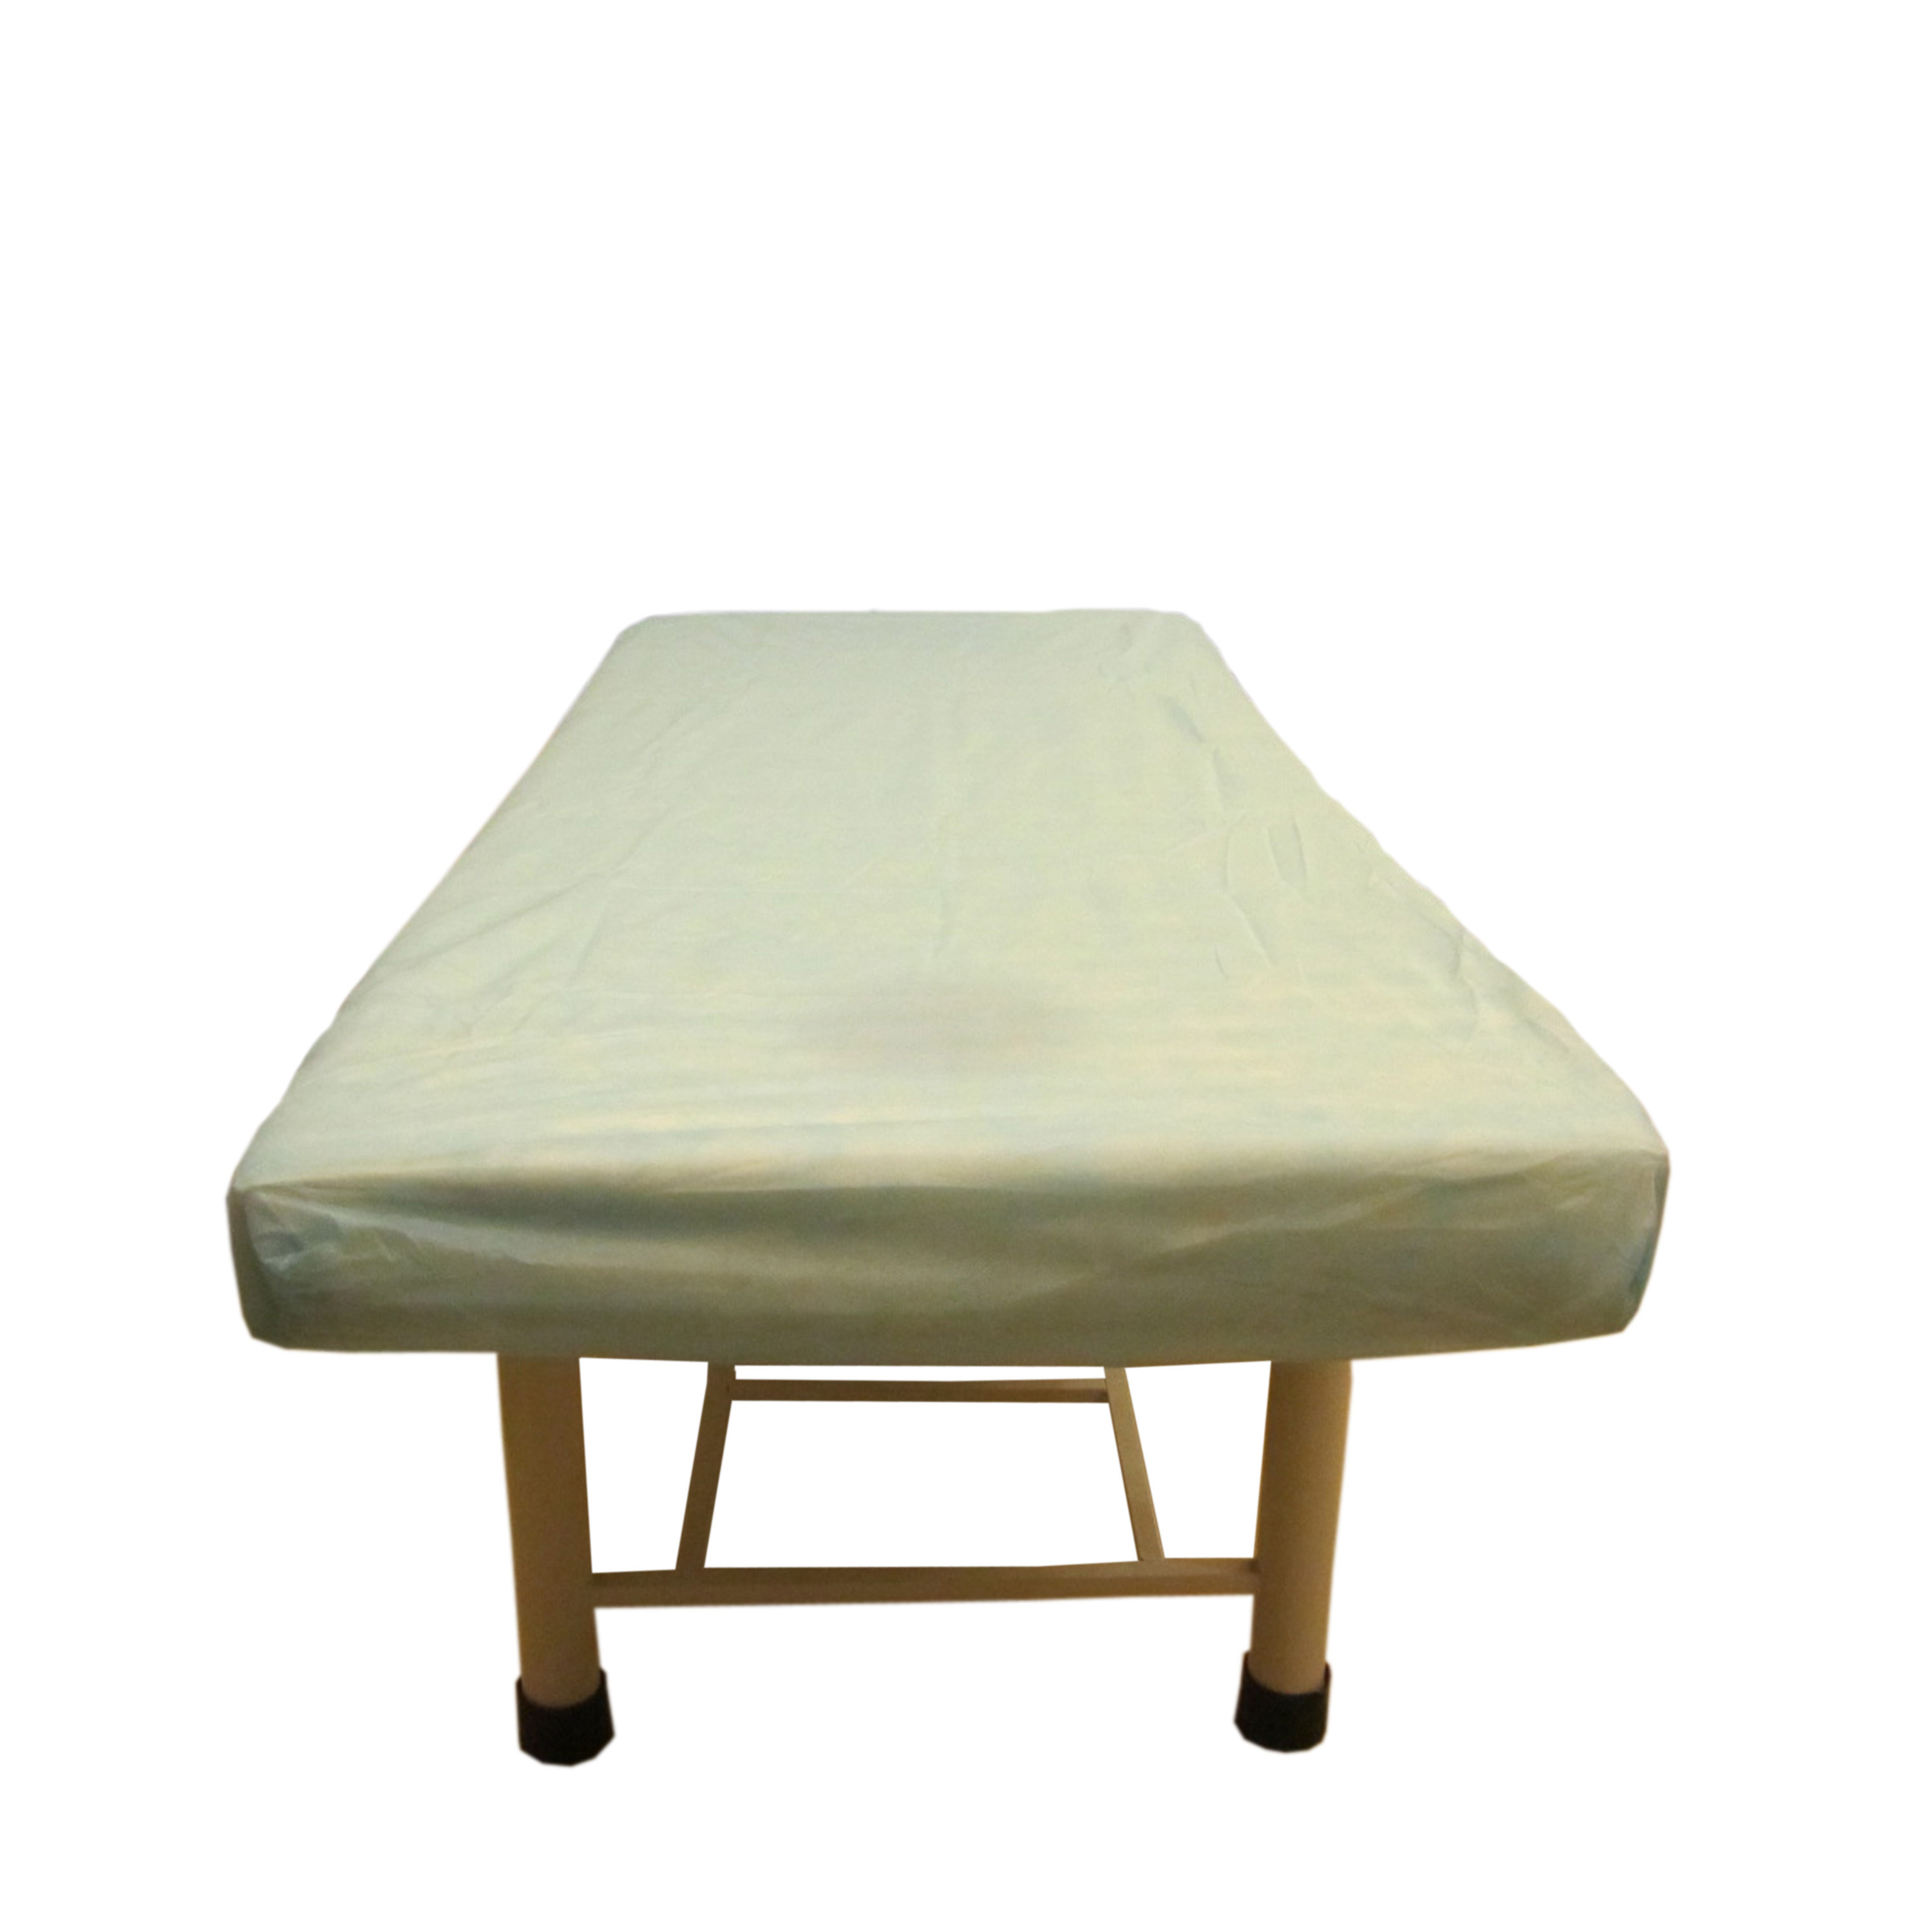 Nonwoven PP/PP+PE/SMS disposable fitted medical hospital bed cover with elastic around